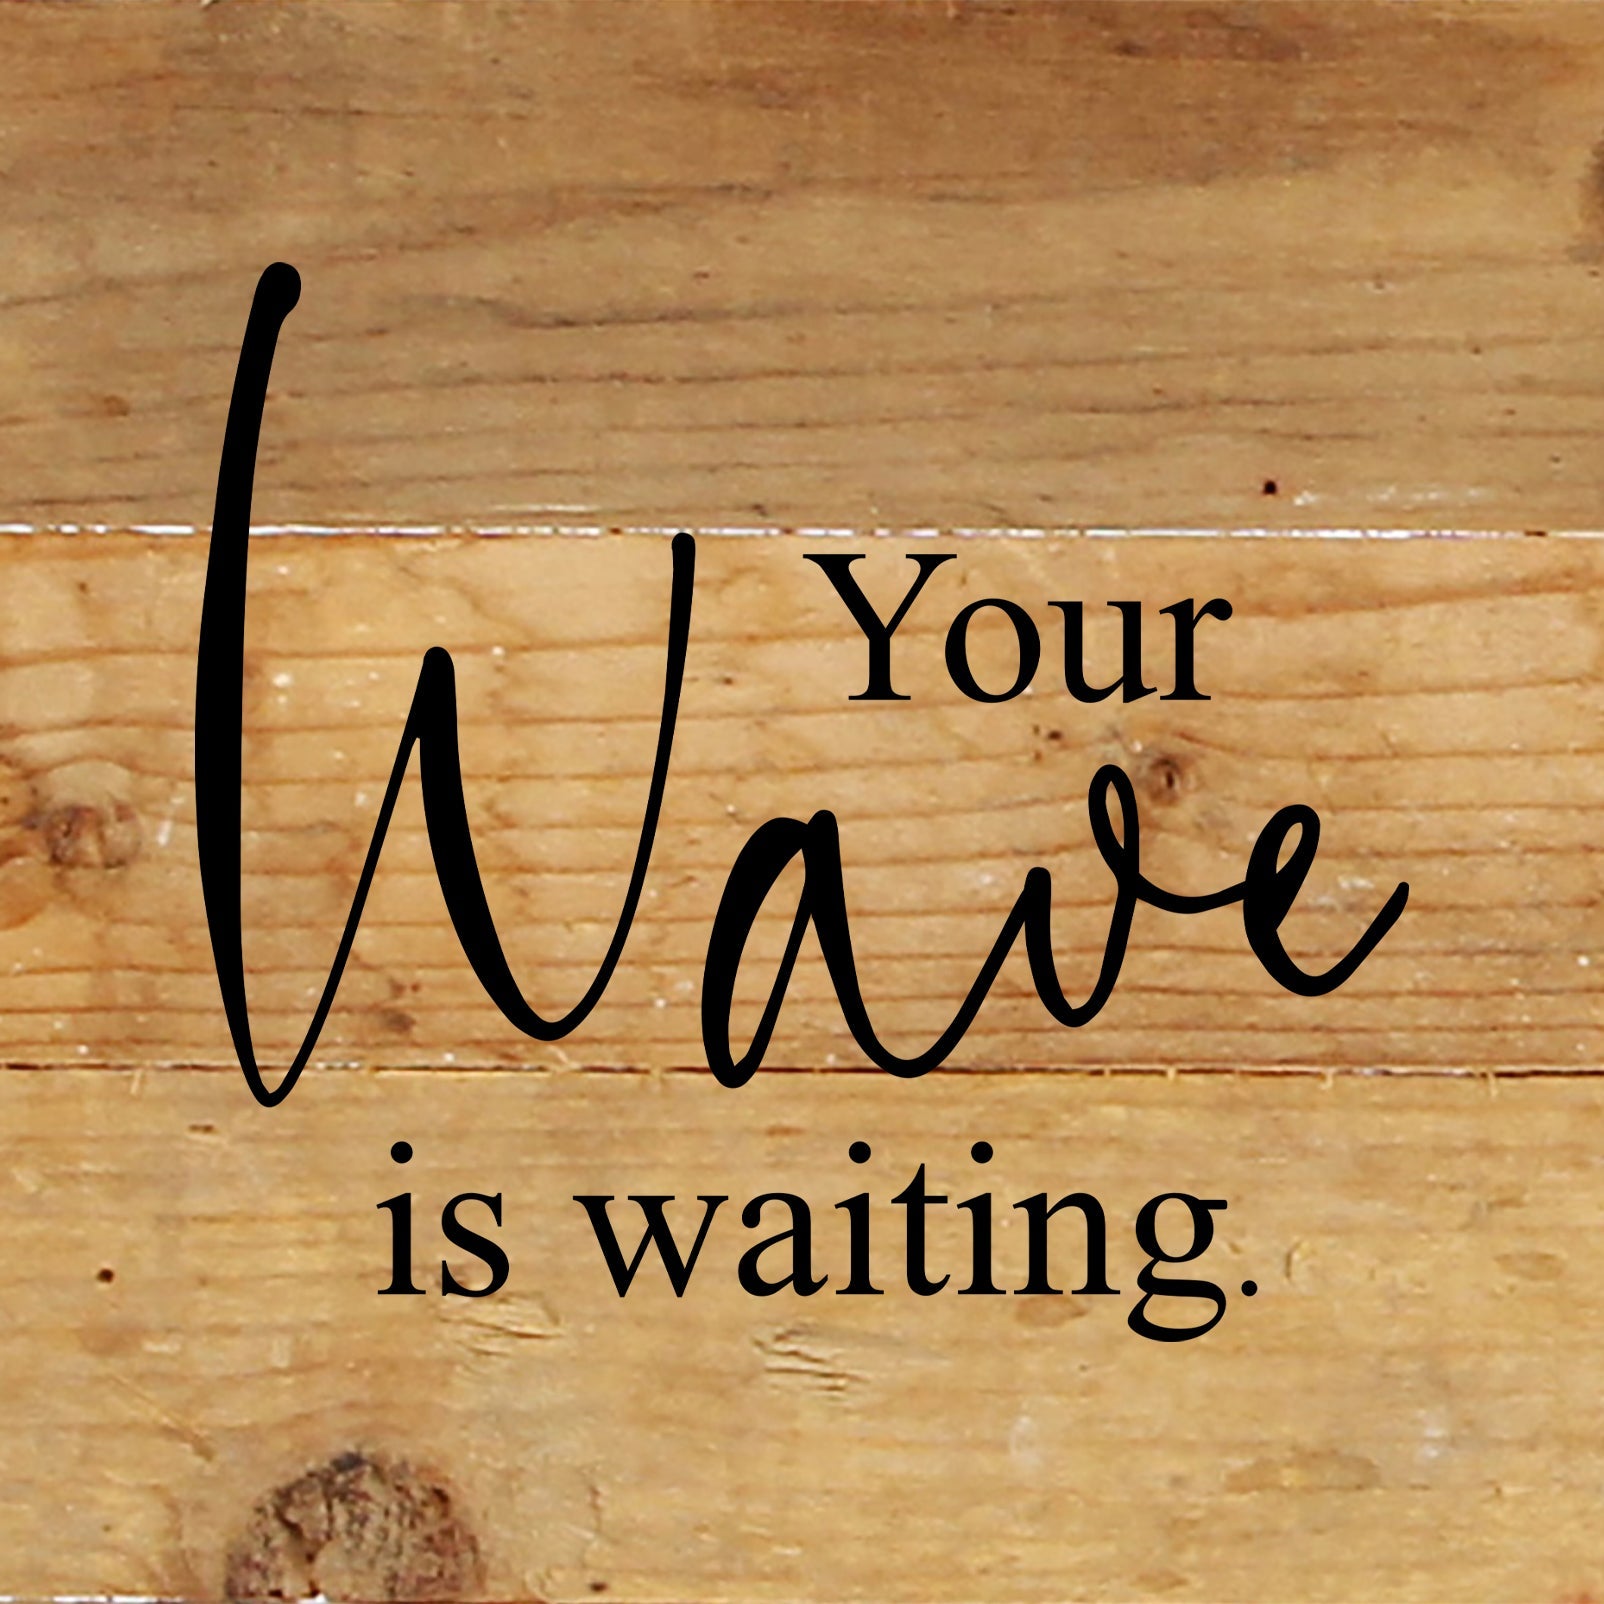 Your wave is waiting / 6"x6" Reclaimed Wood Sign